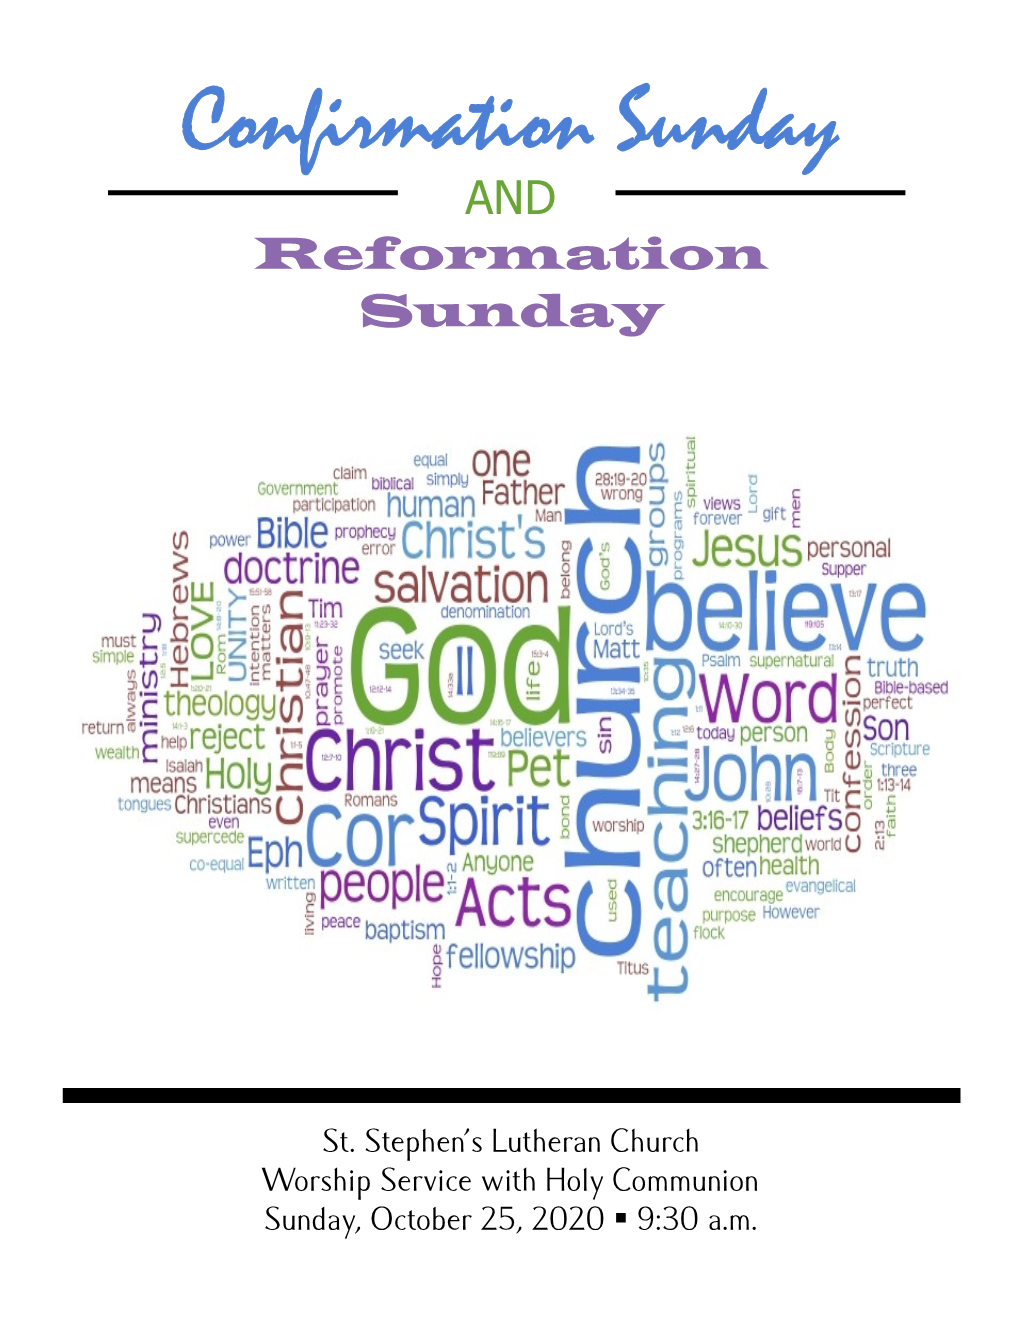 Confirmation Sunday and Reformation Sunday